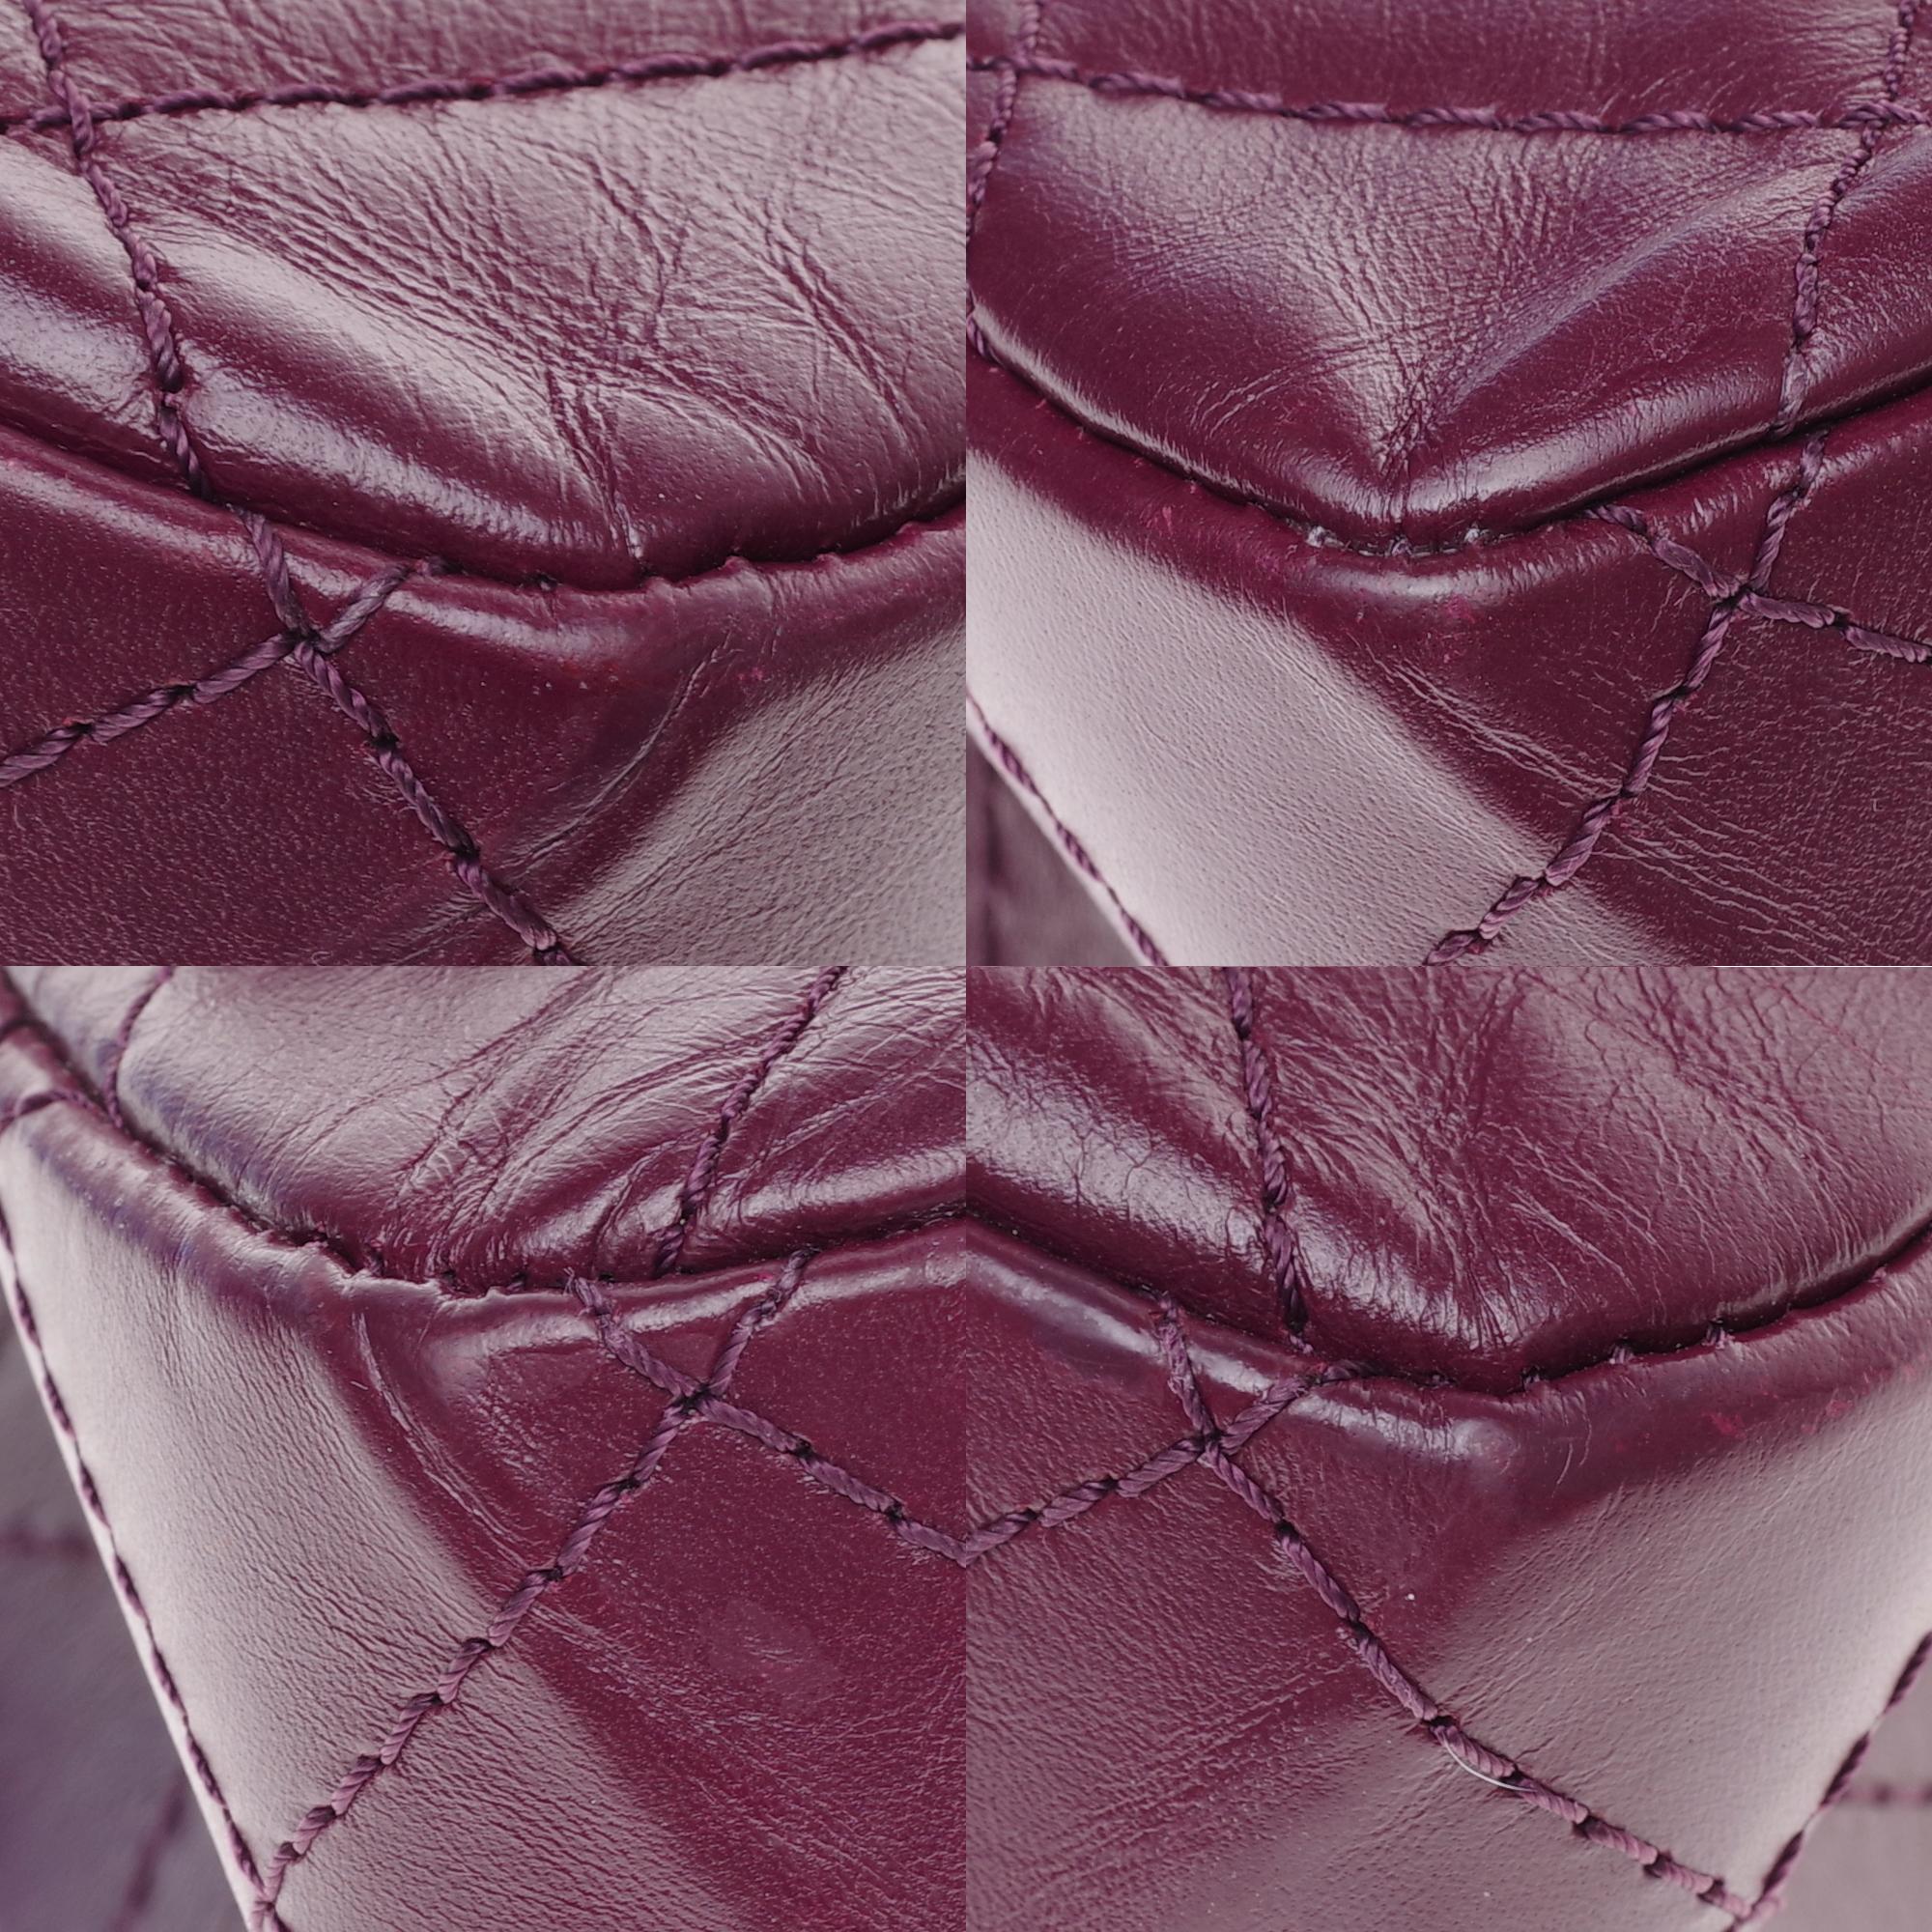 Amazing Chanel 2.55 Reissue handbag in plum quilted leather 7